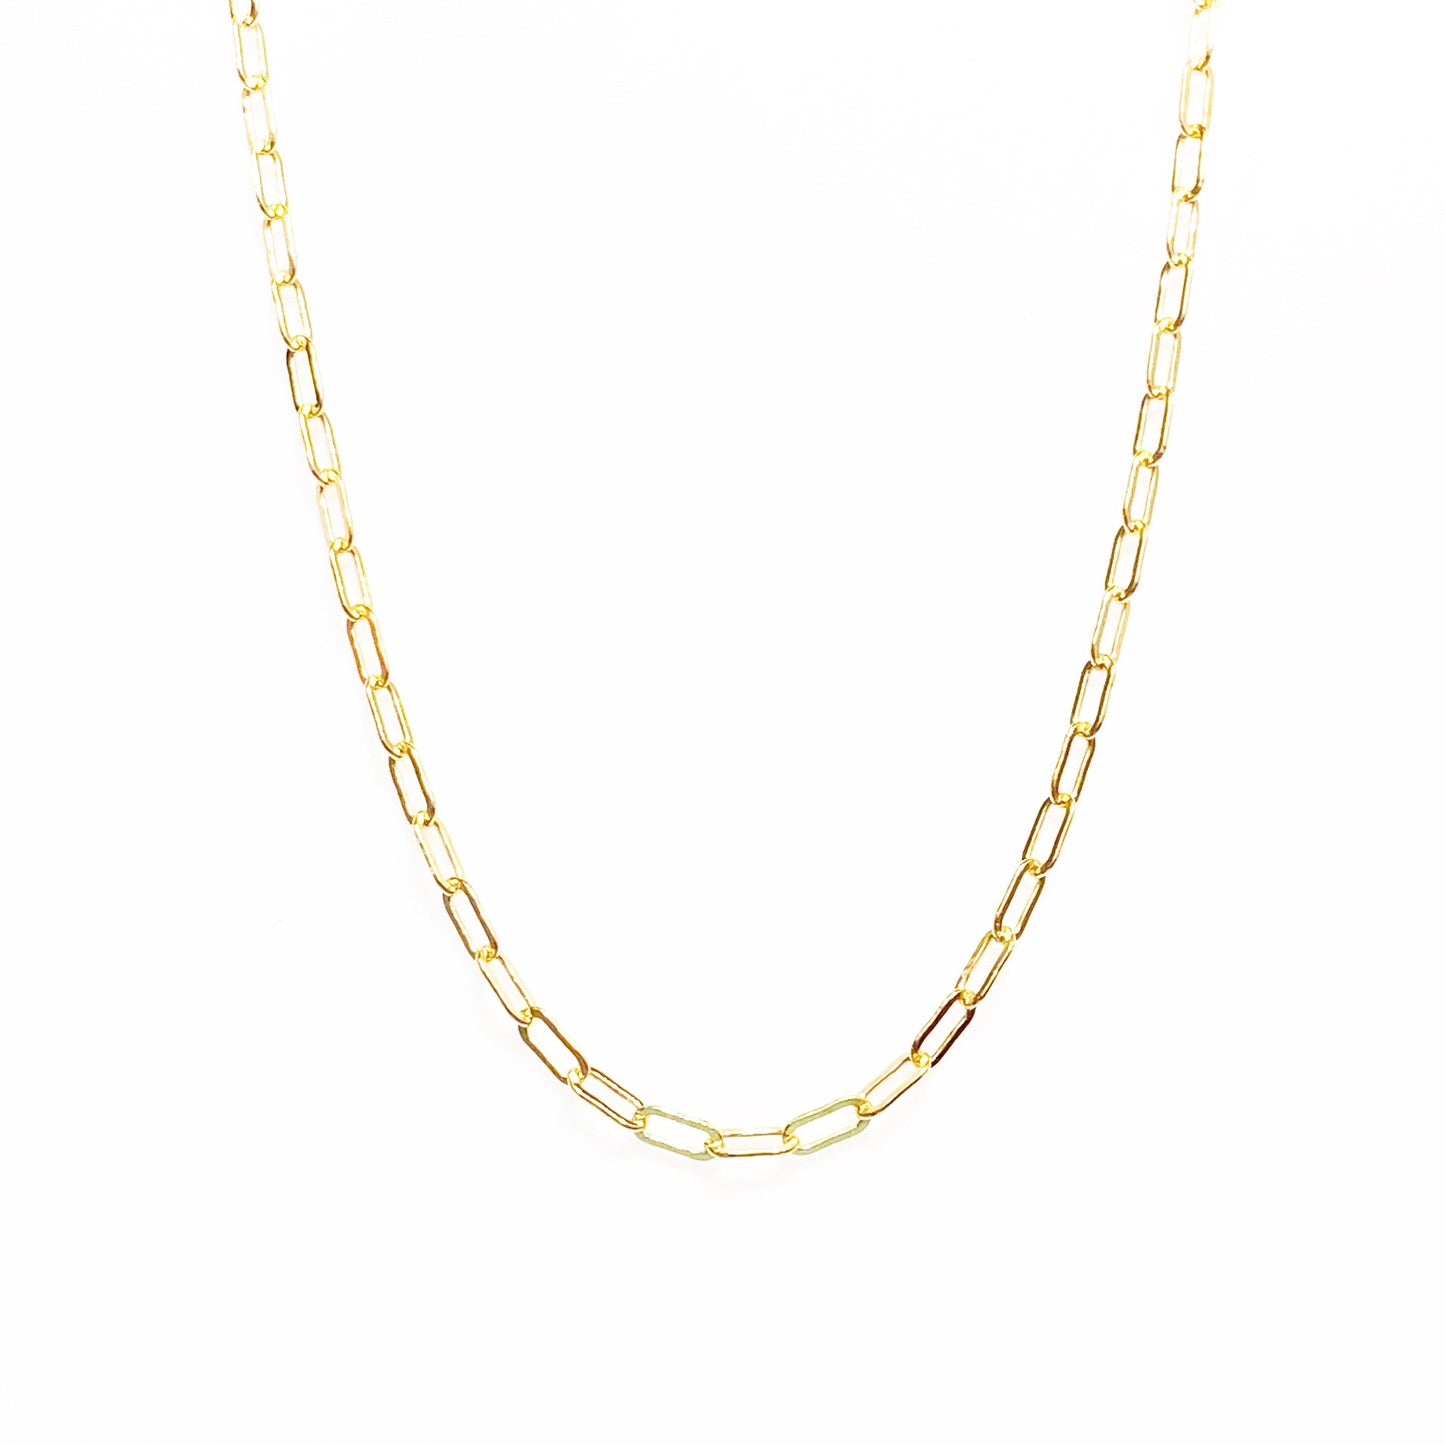 Fine and bold staple chains and bracelets (14K gold-filled)